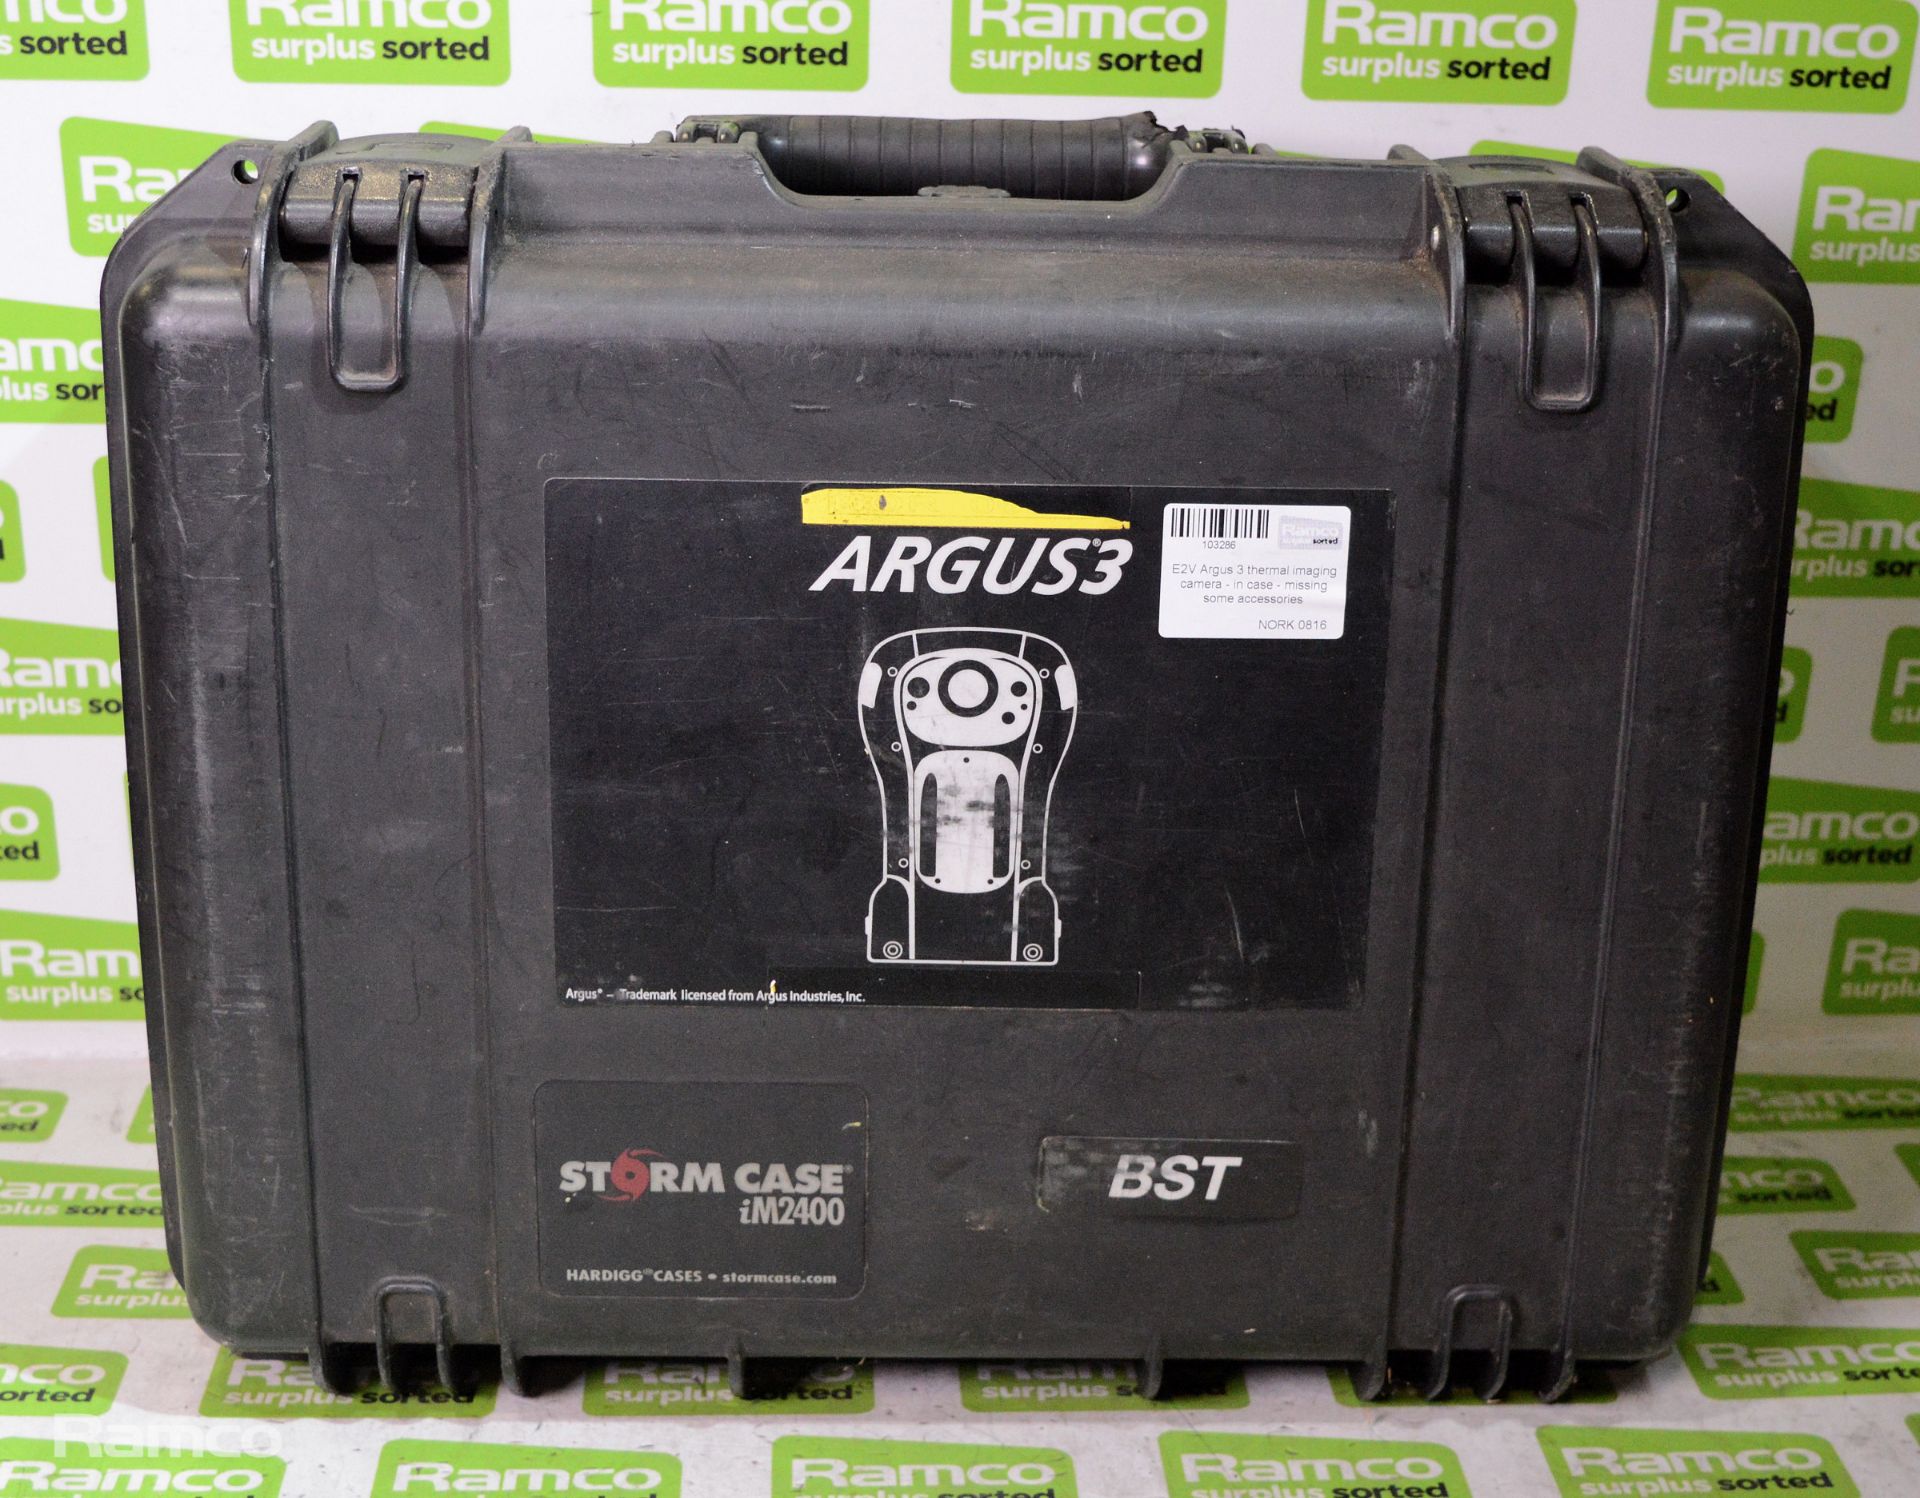 E2V Argus 3 thermal imaging camera - in case - missing some accessories - Image 7 of 7